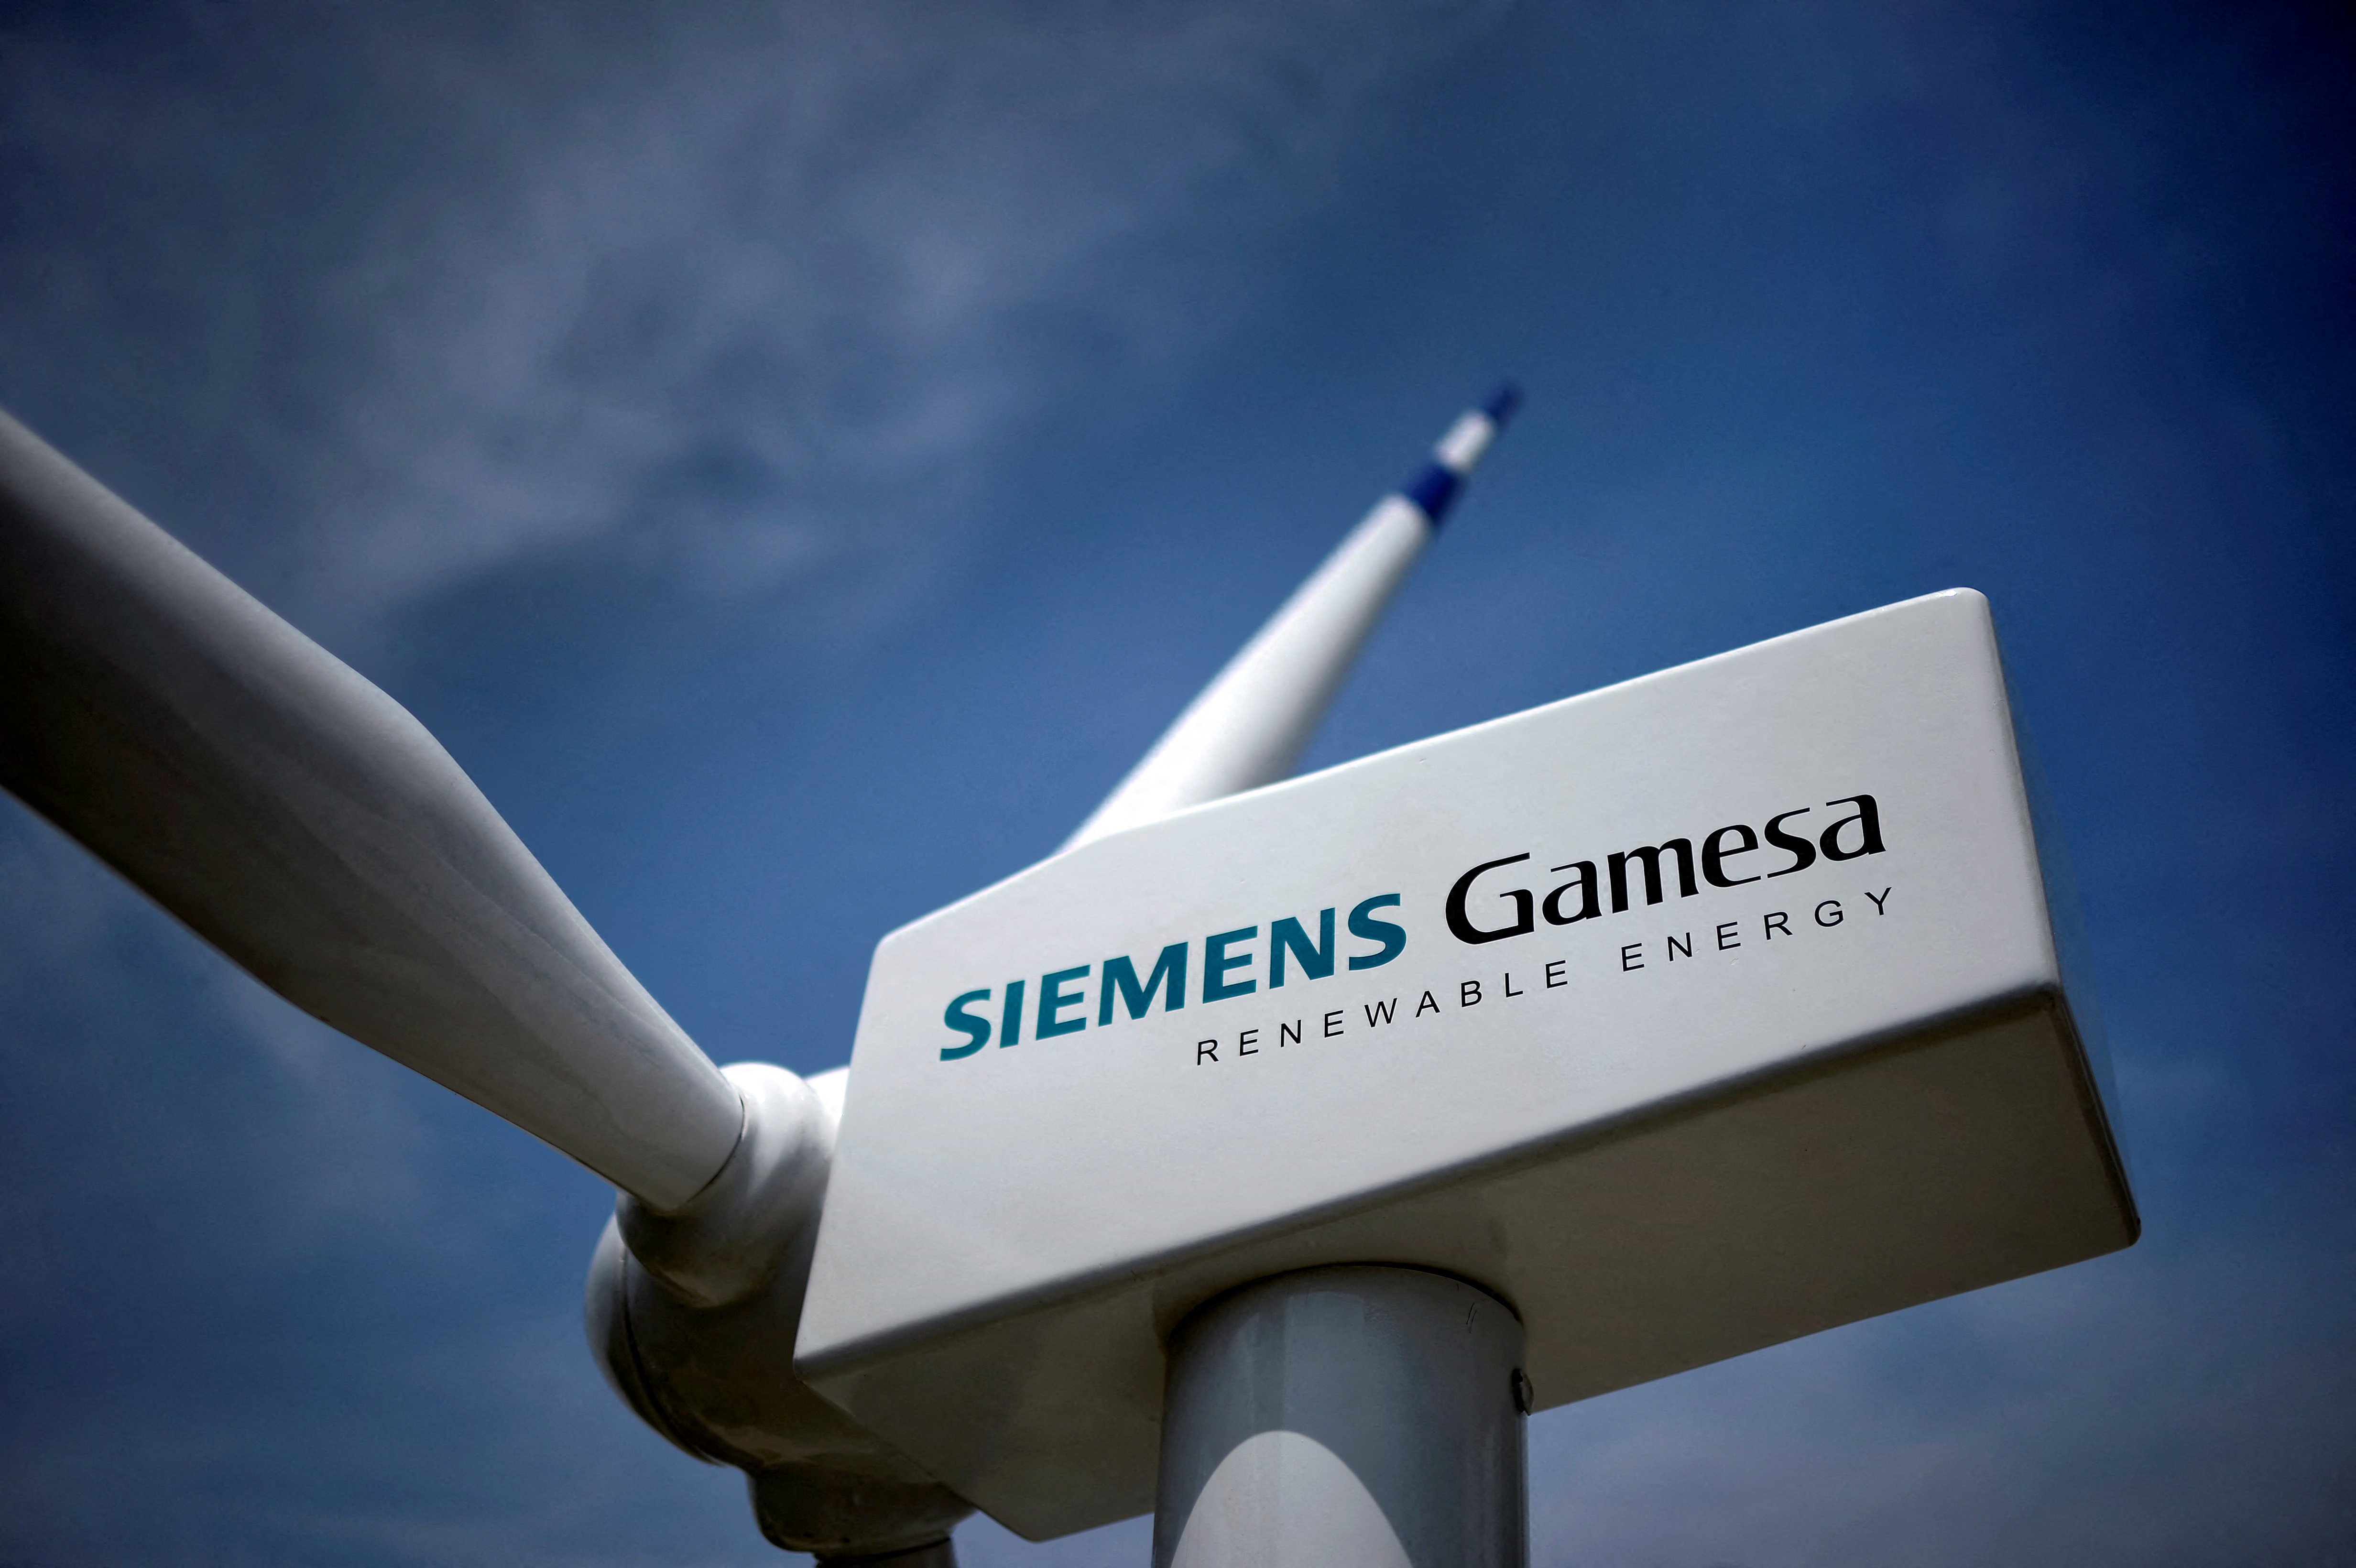 A model of a wind turbine with the Siemens Gamesa logo is displayed outside the annual general shareholders meeting in Zamudio